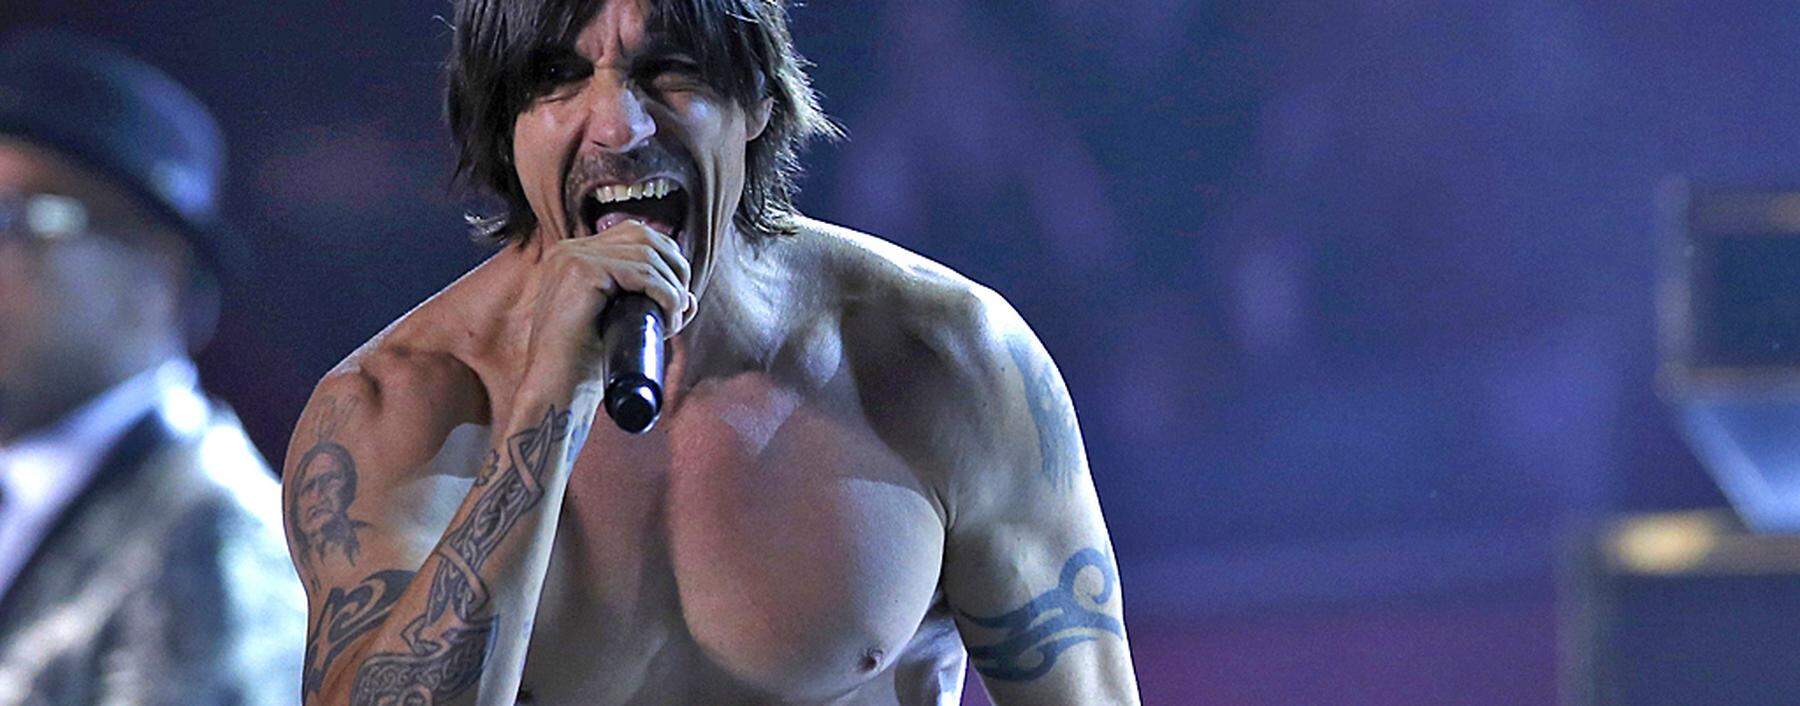 Anthony Kiedis of The Red Hot Chili Peppers performs during the halftime show of the NFL Super Bowl XLVIII football game between the Denver Broncos and the Seattle Seahawks in East Rutherford